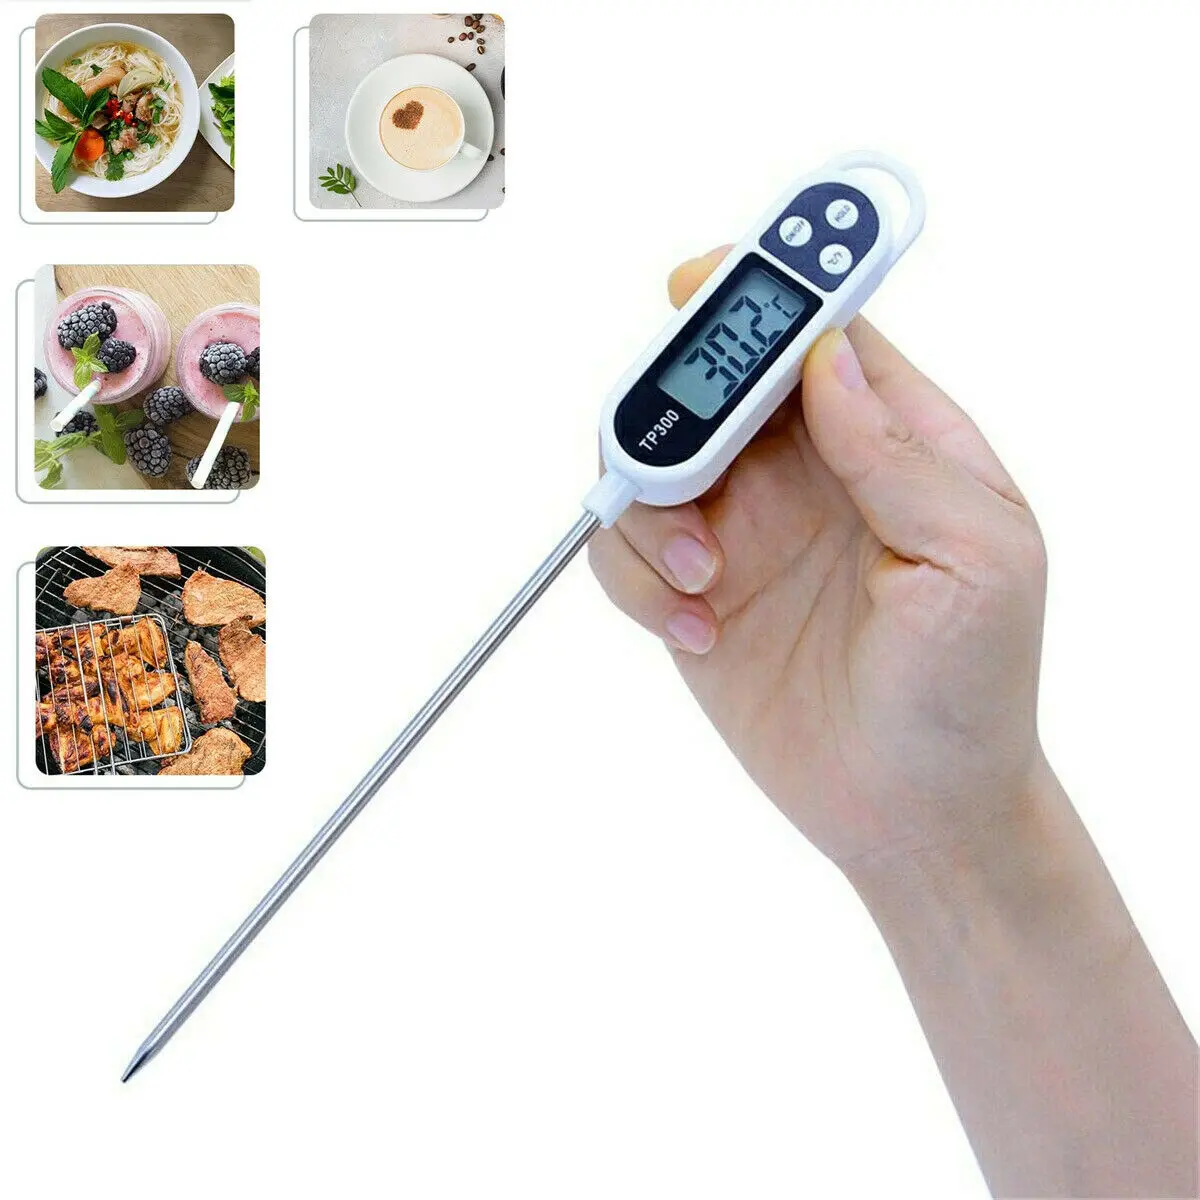 TP300 Digital Food Thermometer Probe For Kitchen BBQ Meat Water Milk Oil Tea Soup Electronic Oven Temperature Measuring Tool